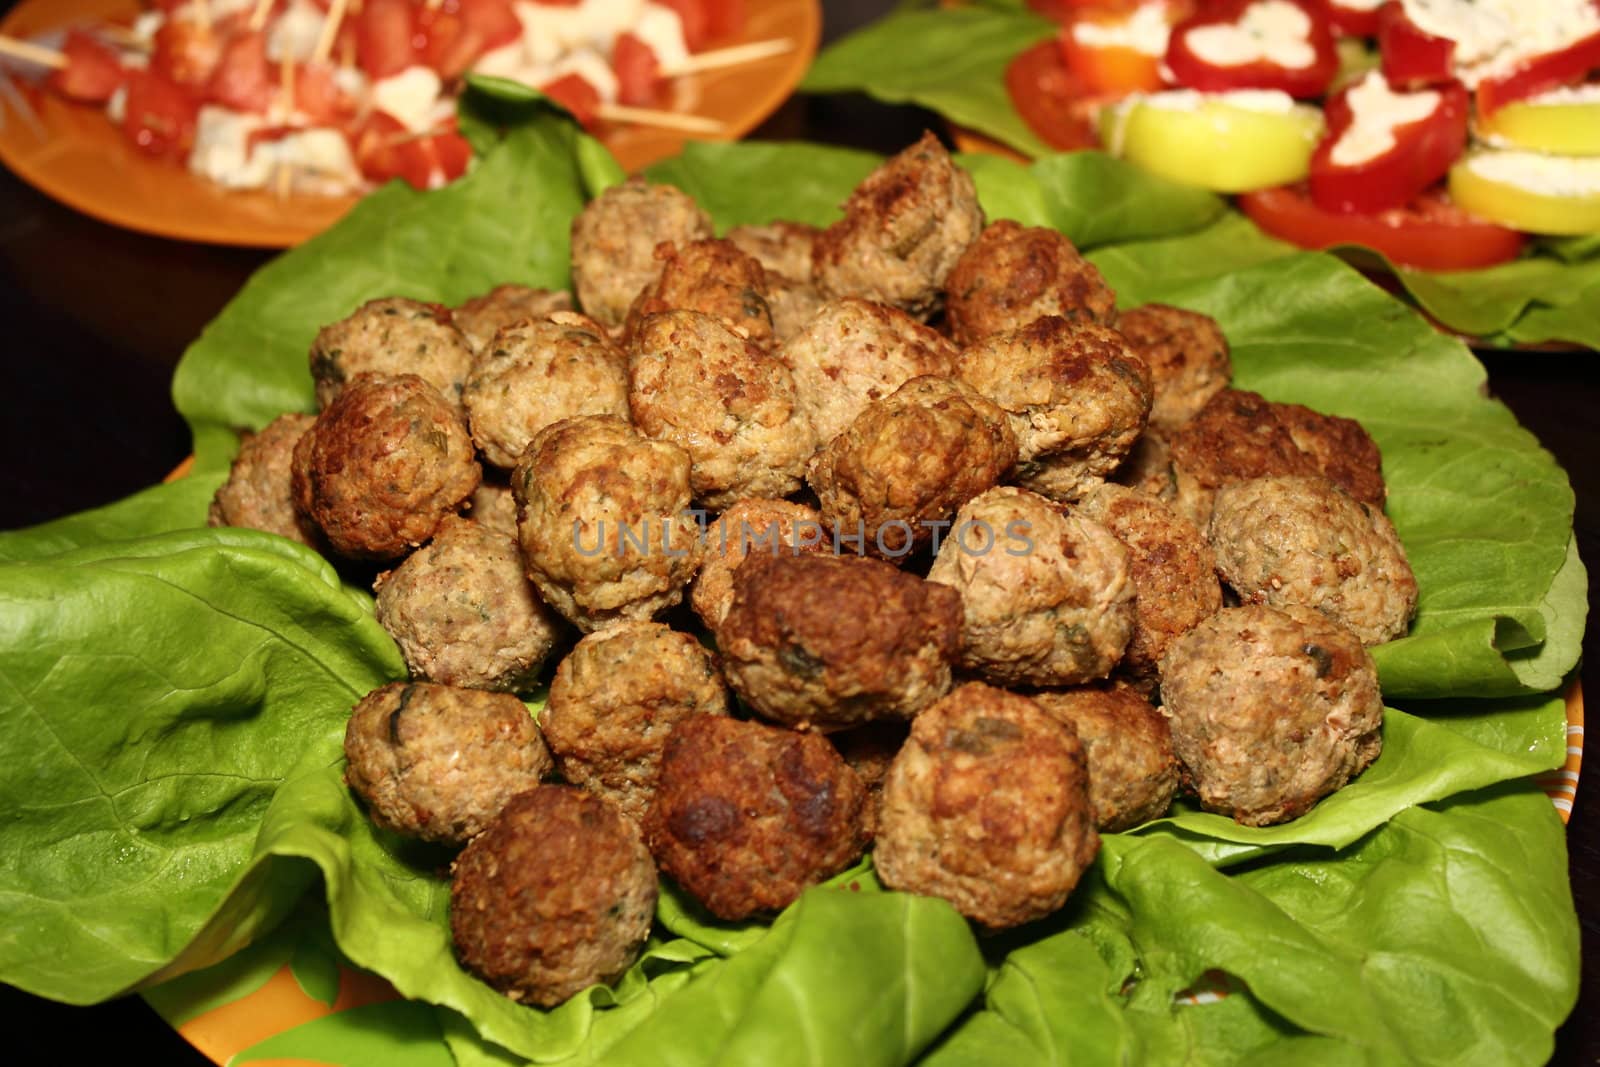 meatballs and green salad by taviphoto